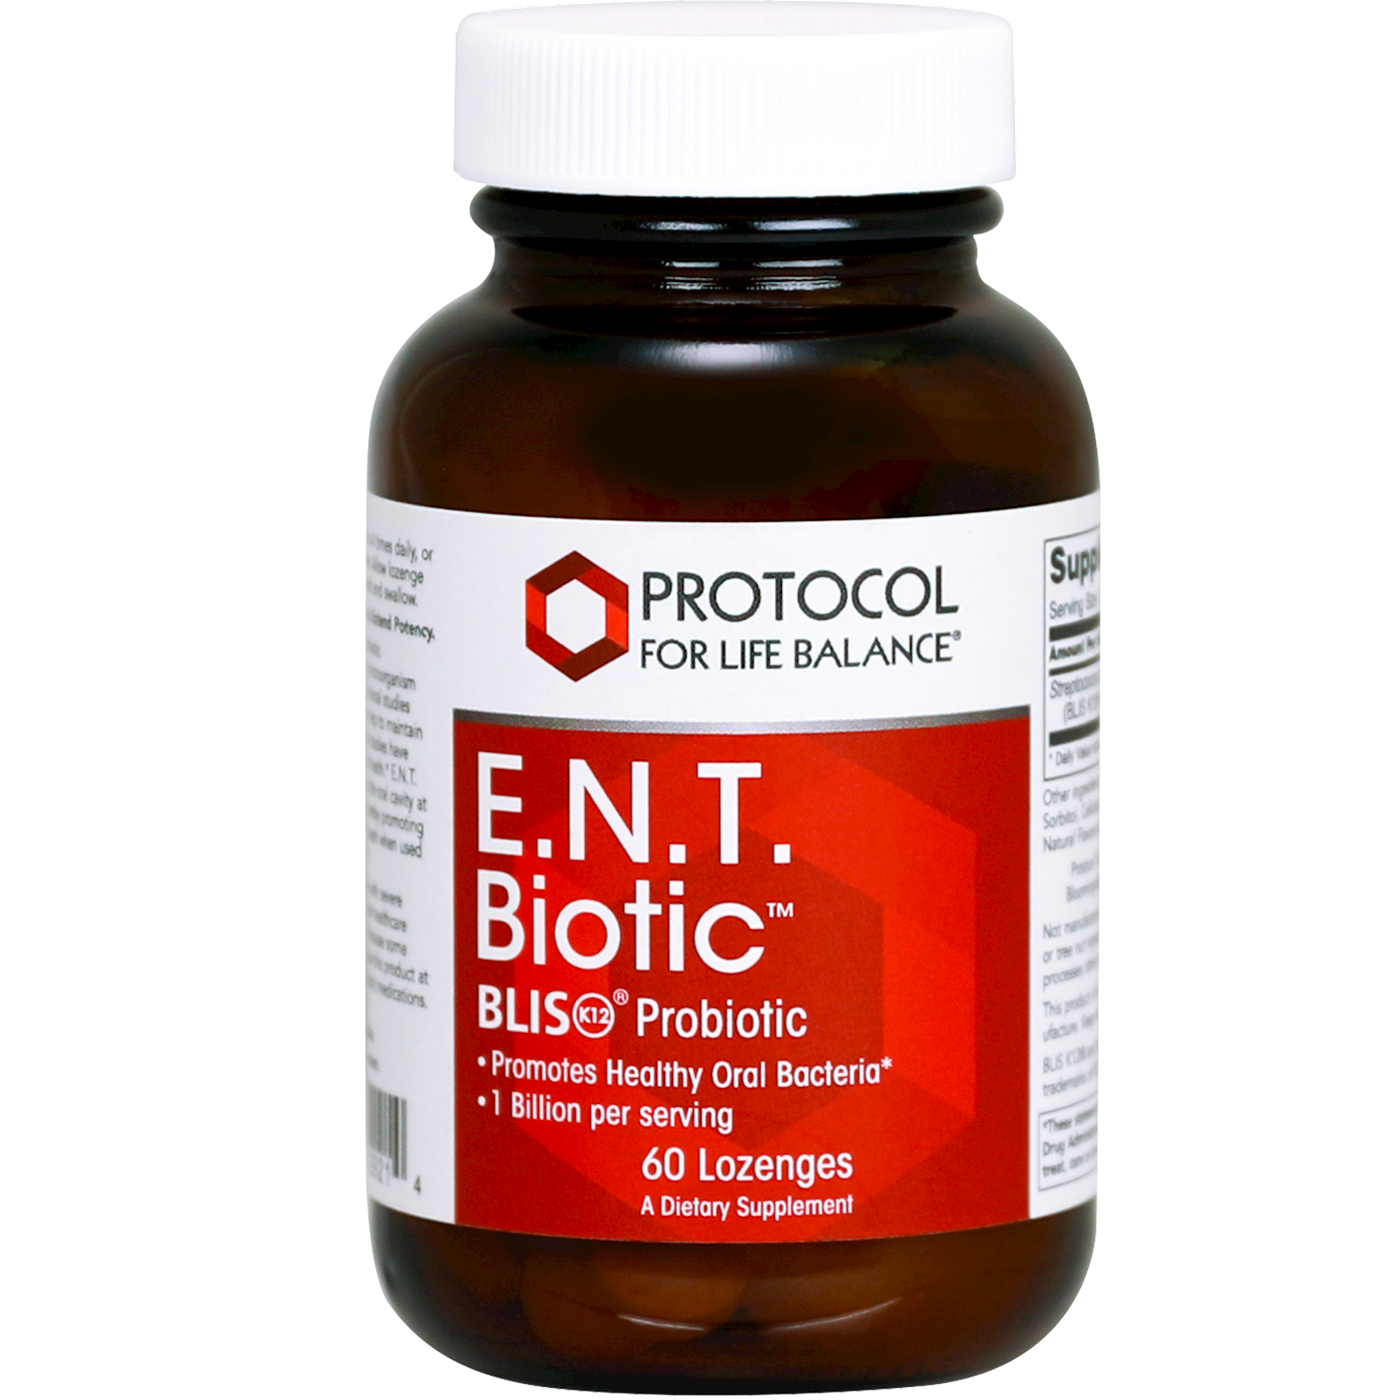 E.N.T. Biotic enges Curated Wellness